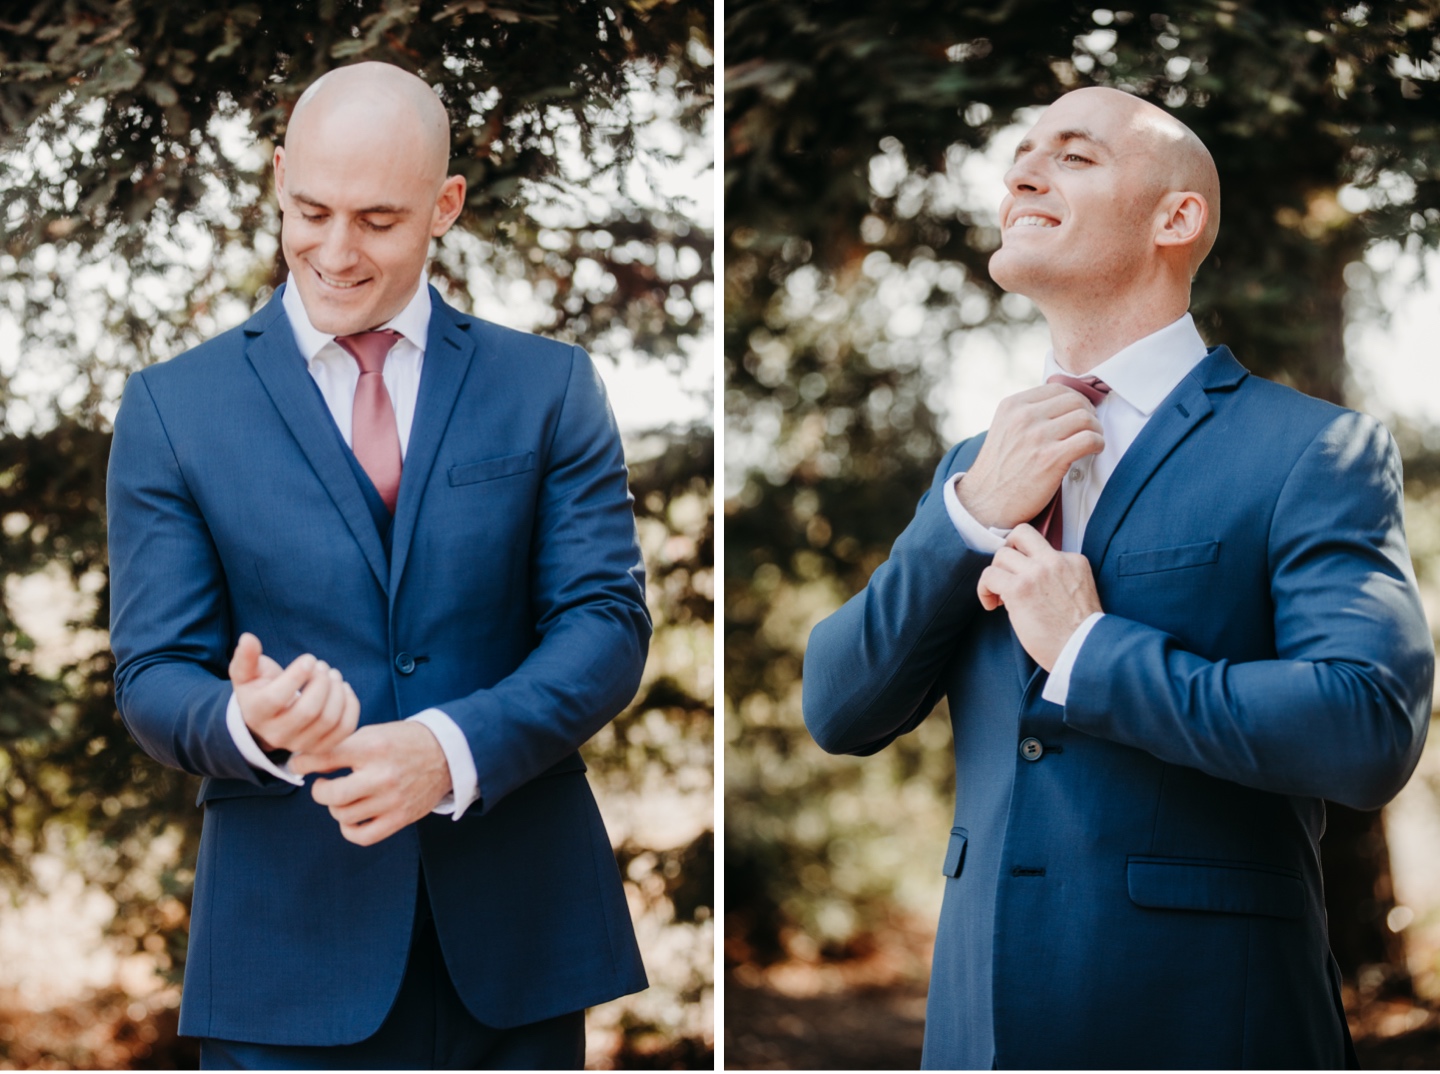 Groom adjusts his cuffs and his tie in his blue suit in front of trees. Wedding photography in Sacramento by Liz Koston.